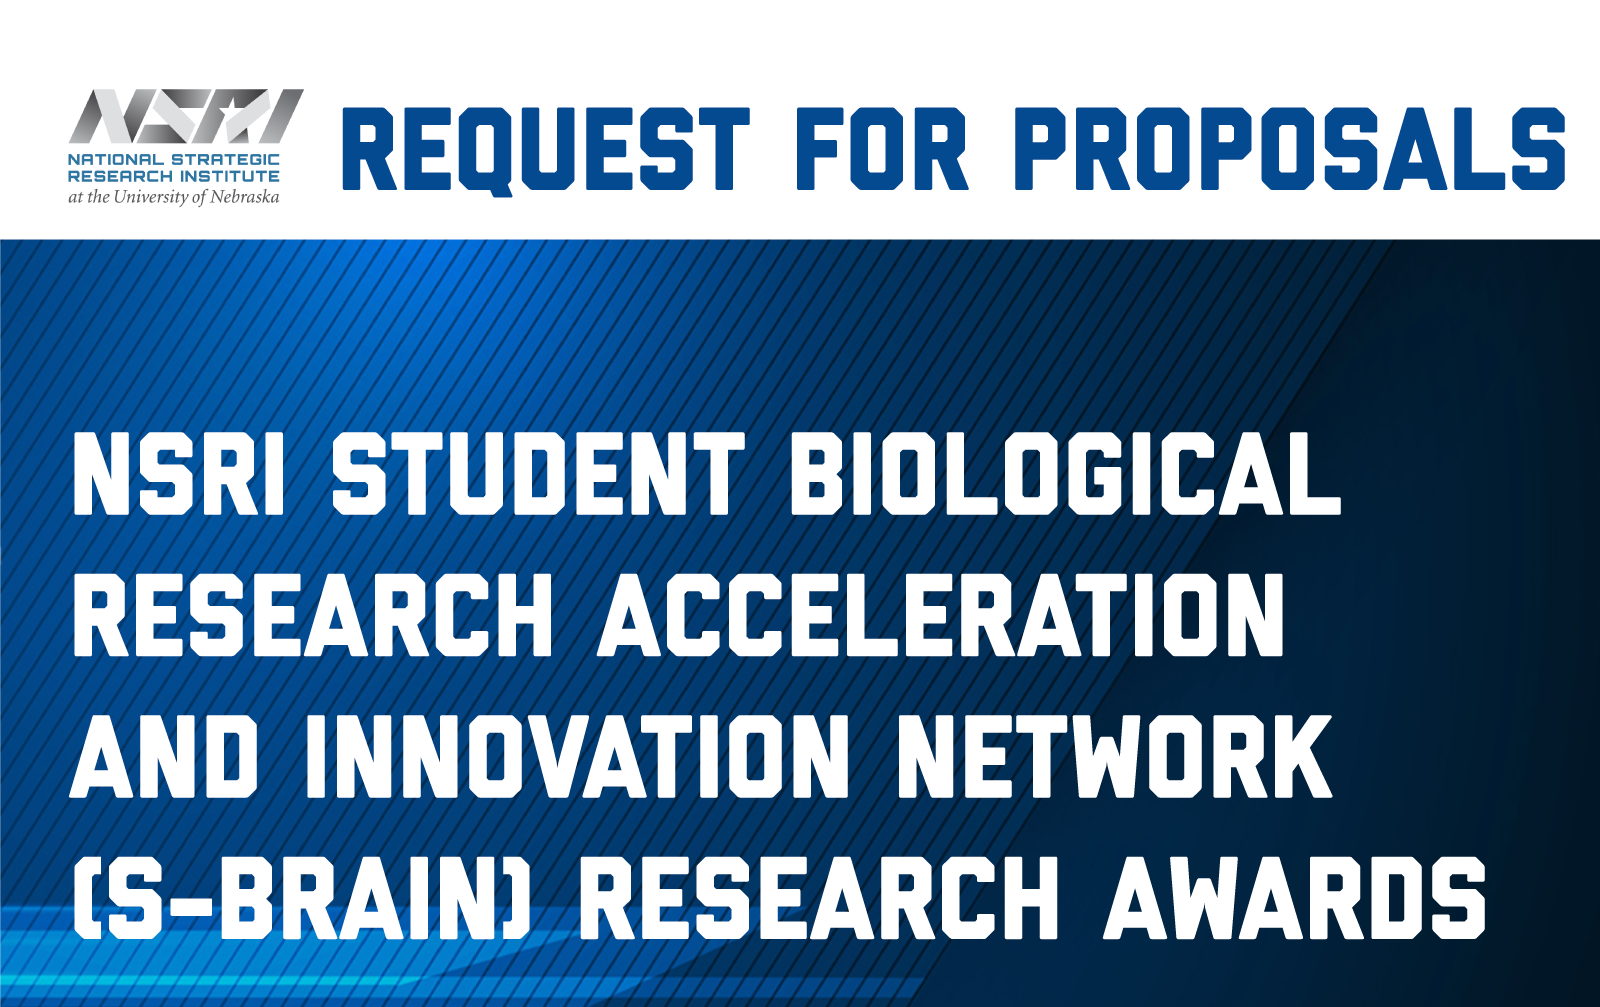 Request for proposals — NSRI Student Biological Research Acceleration and Innovation Network (S-BRAIN) Research Awards